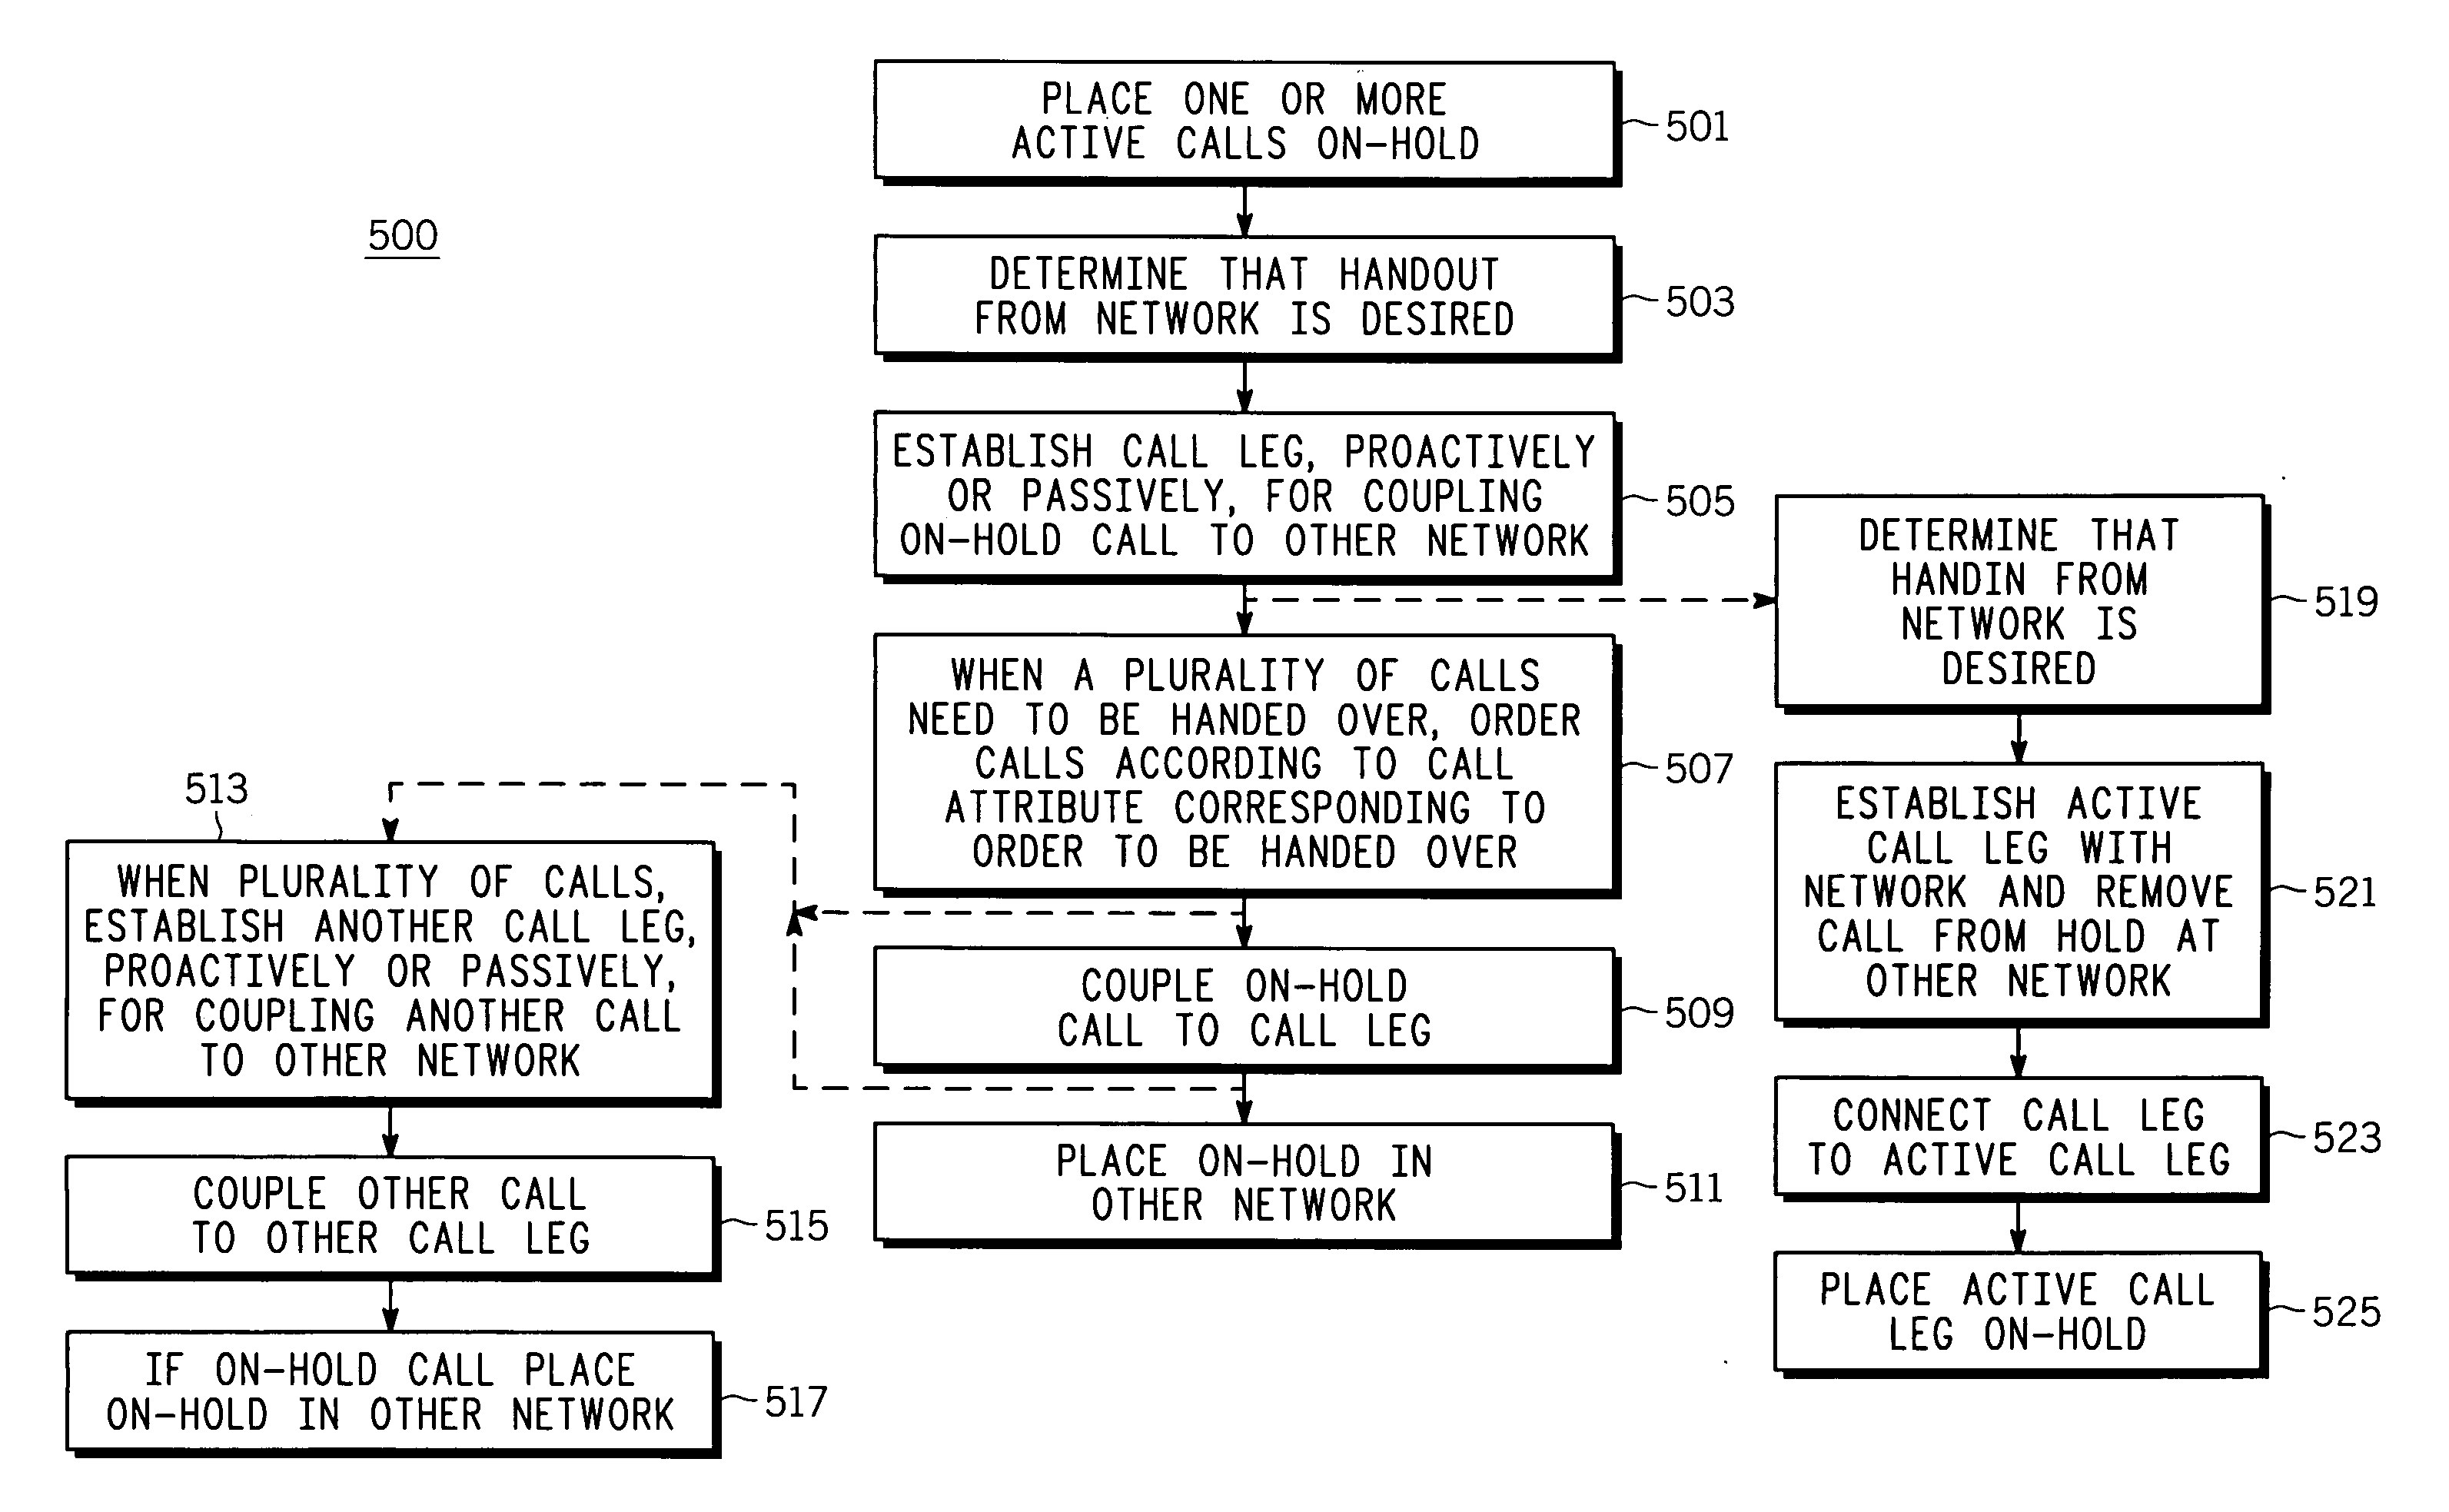 Method and apparatus for routing on hold calls